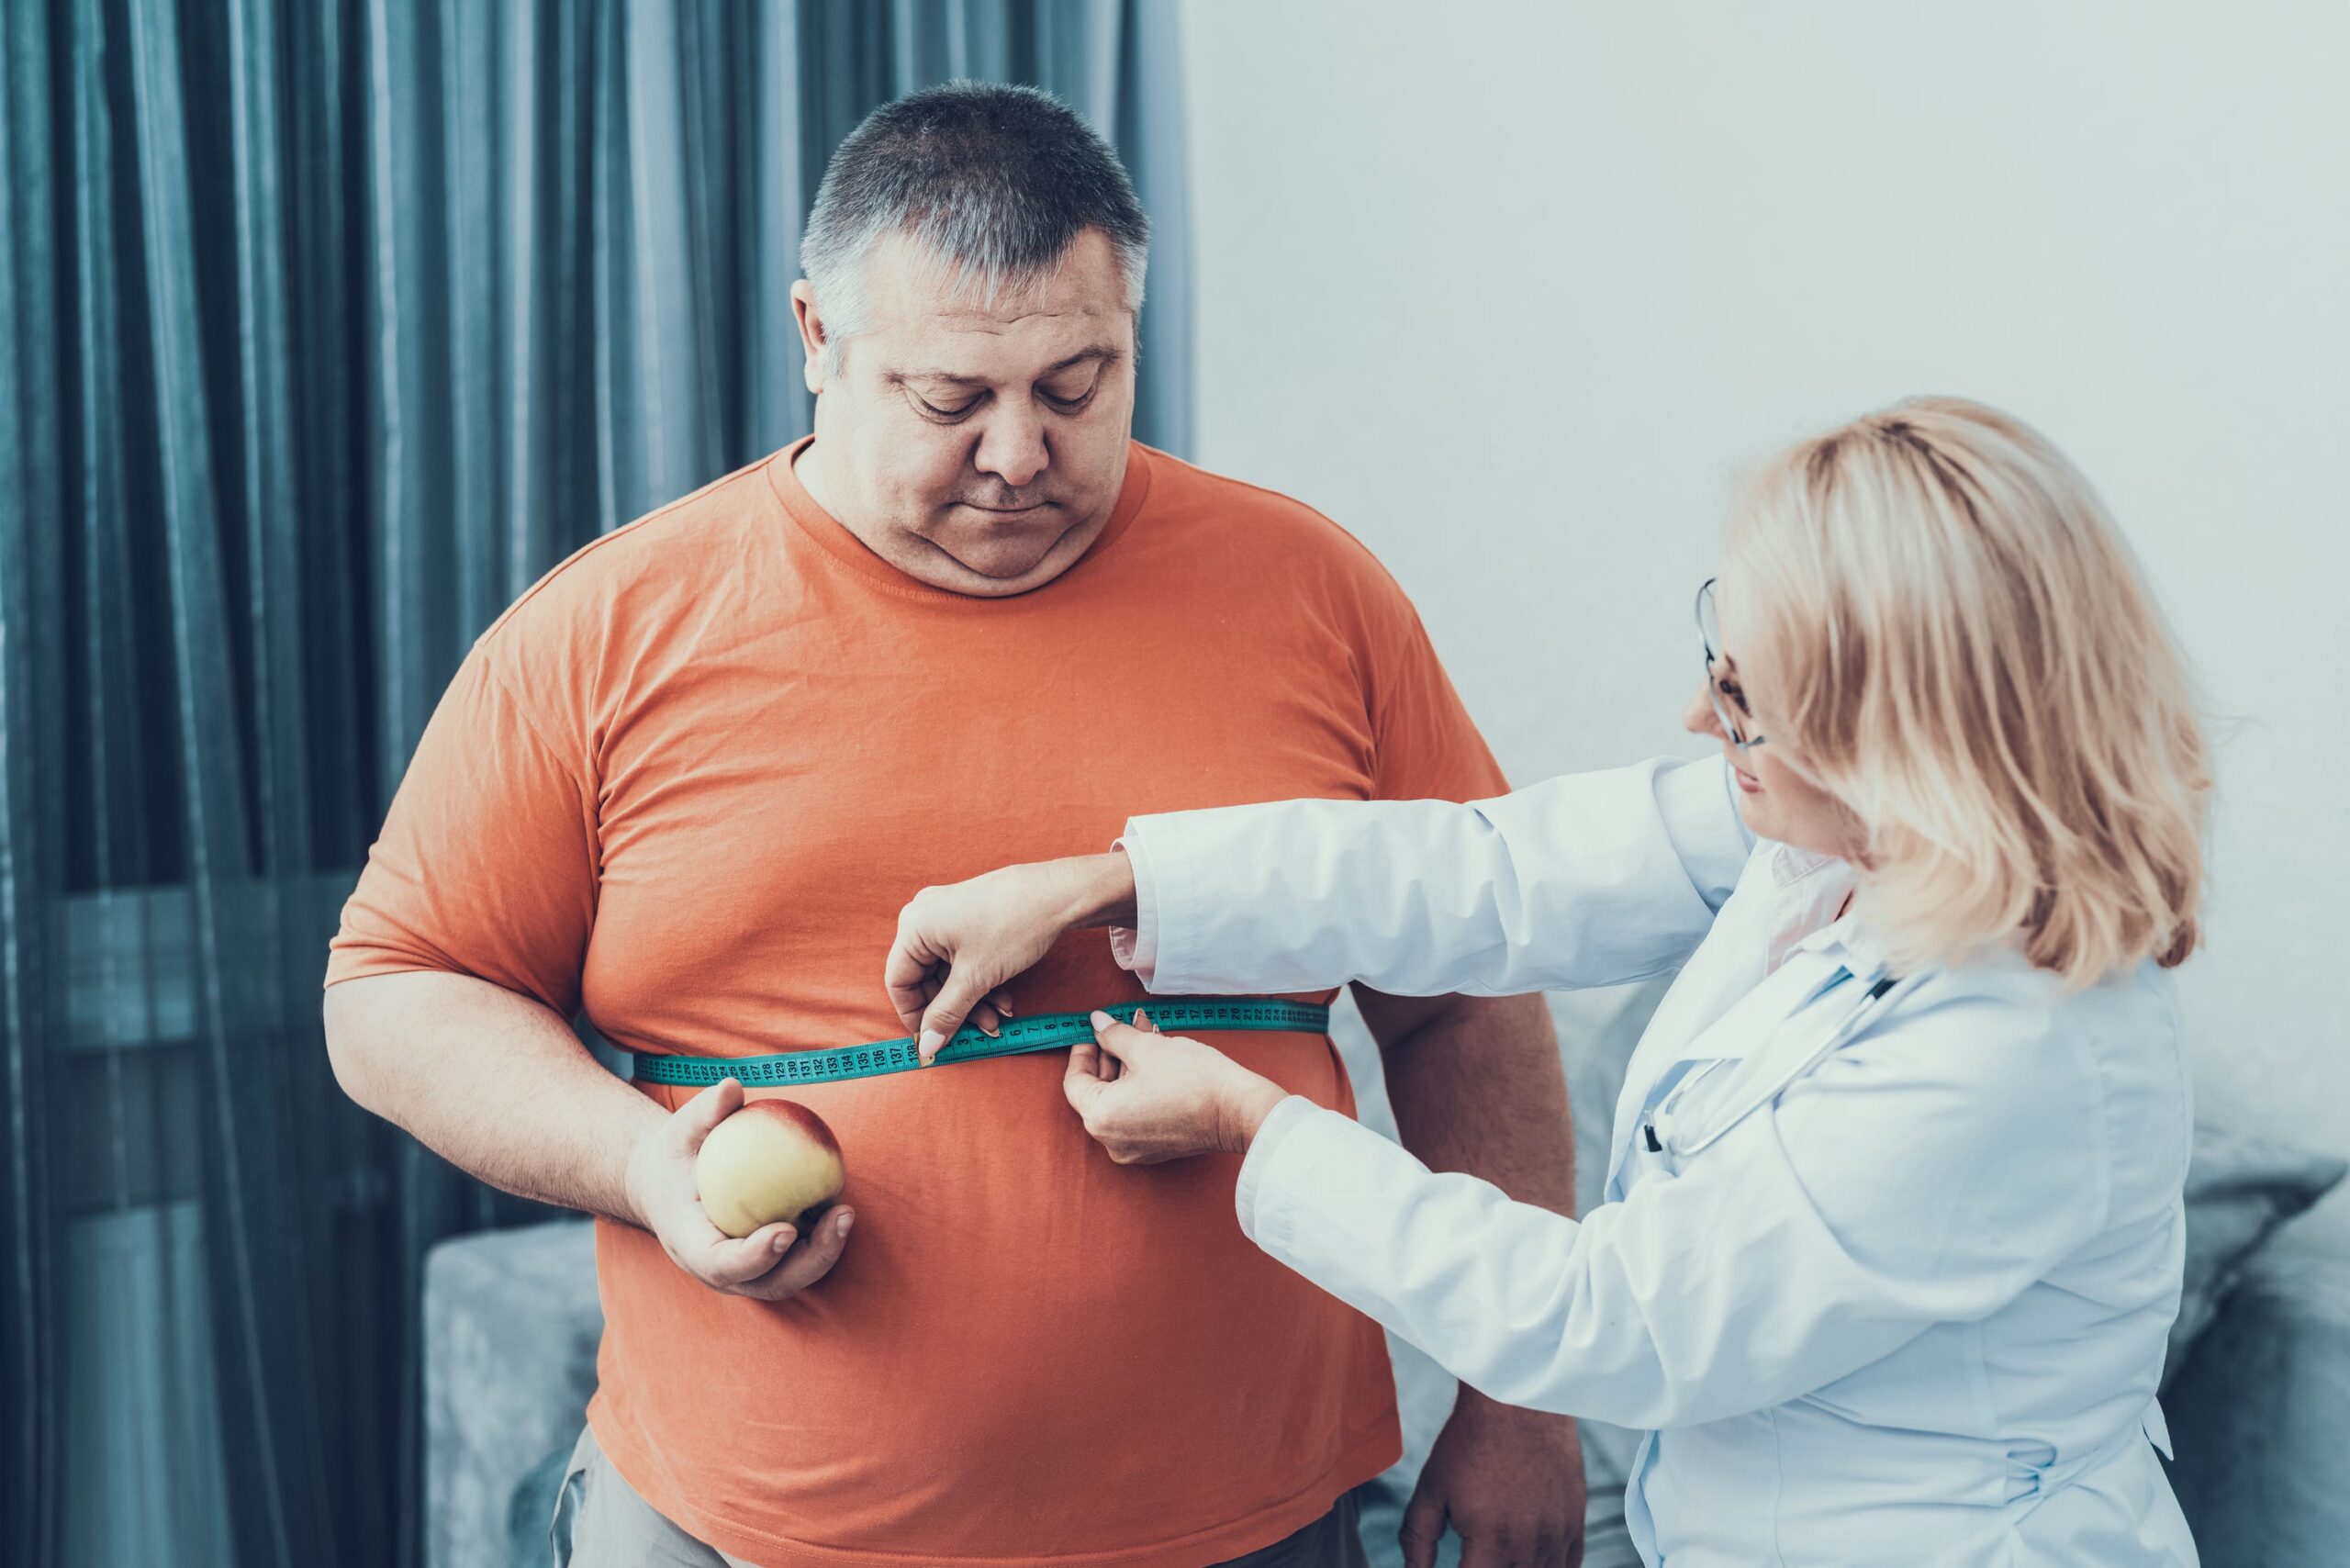 Weight loss surgery: When is it needed and what does it mean?